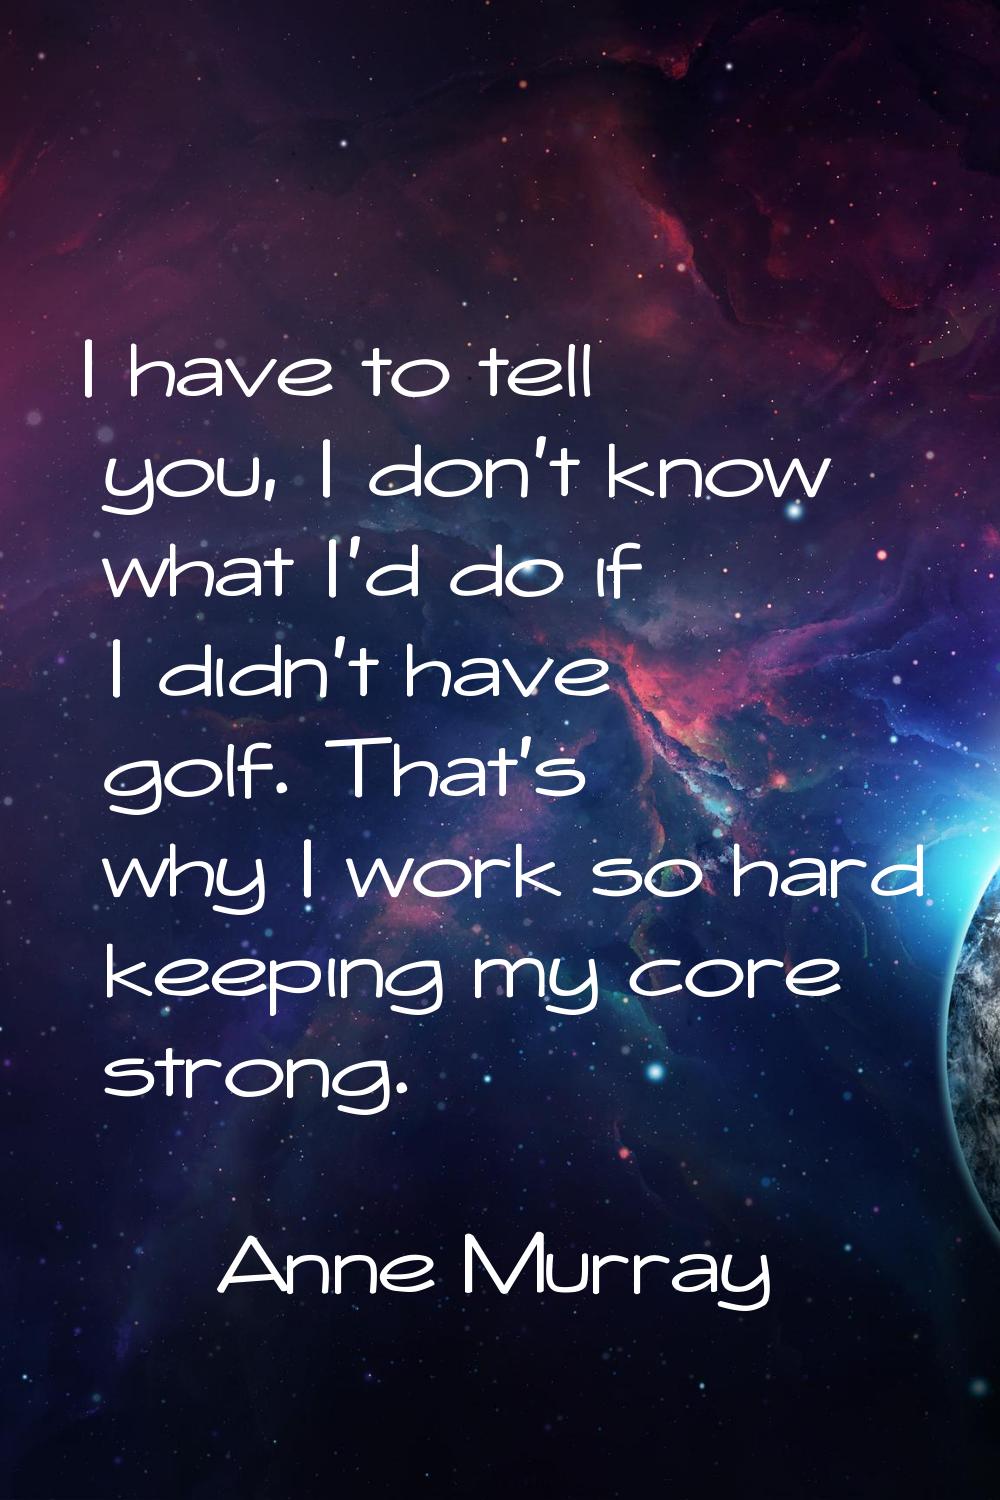 I have to tell you, I don't know what I'd do if I didn't have golf. That's why I work so hard keepi